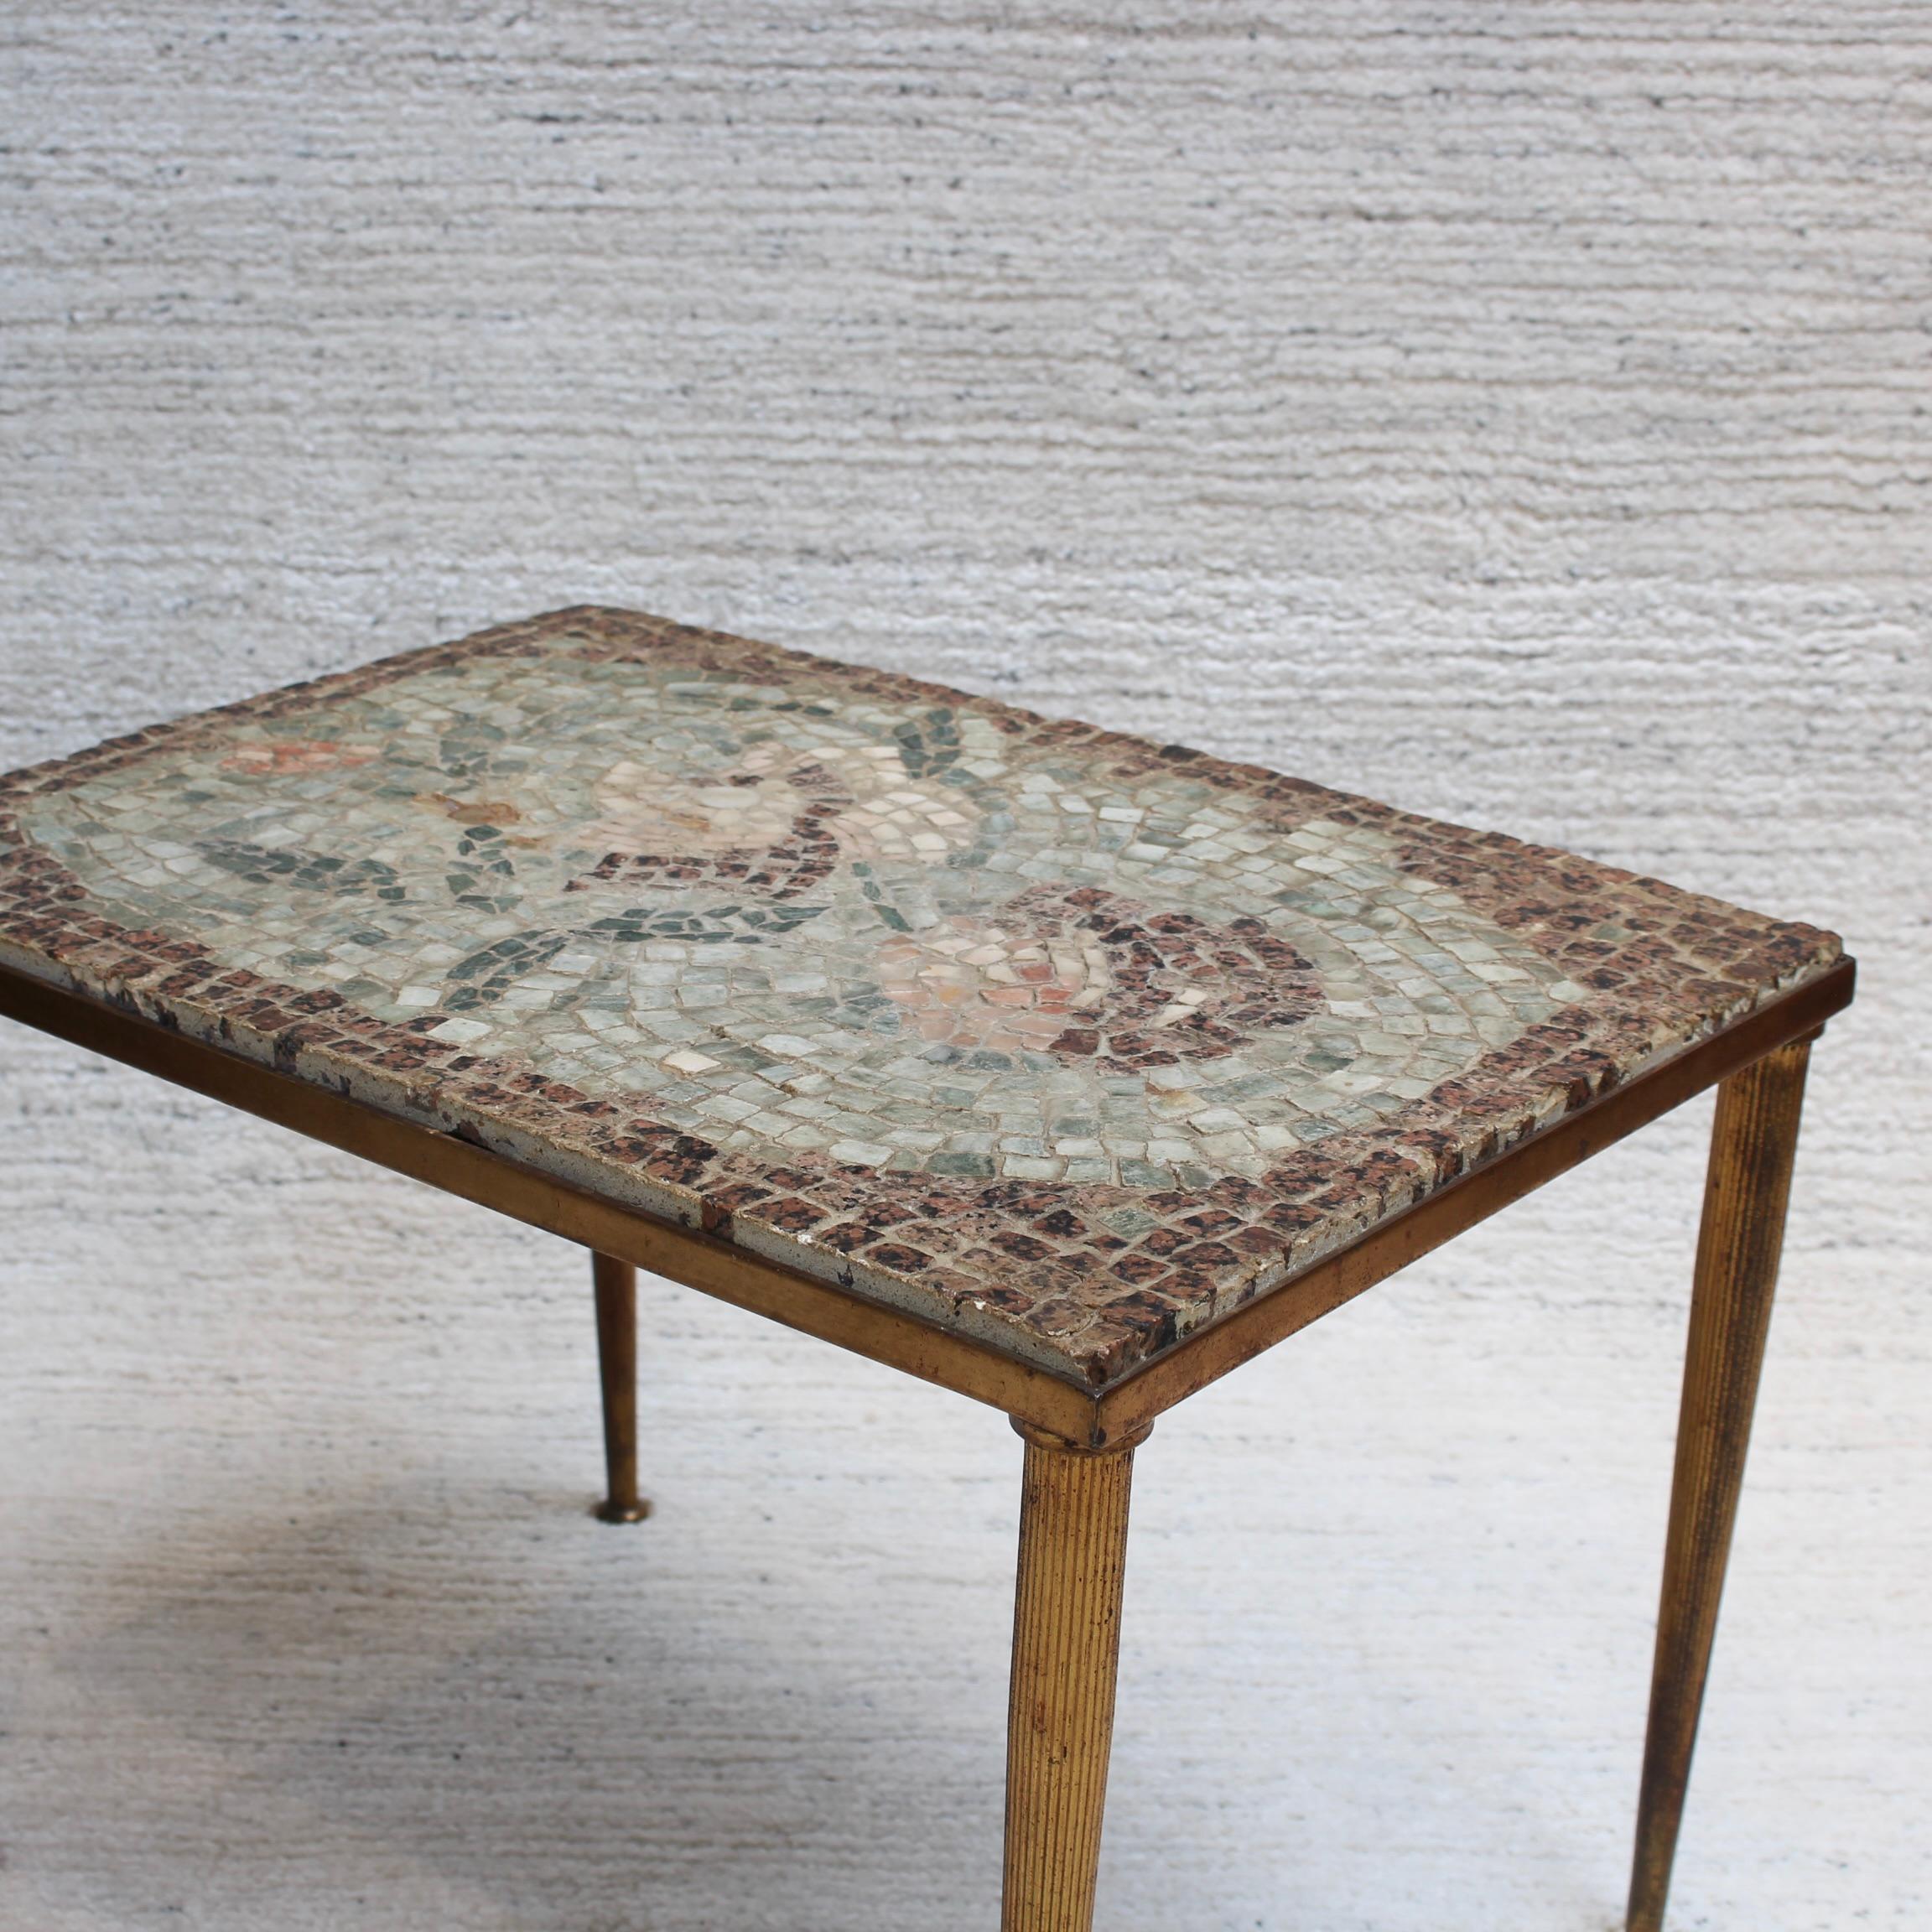 French Vintage Low Table with Italian Style Mosaic Top, 'circa 1950s' For Sale